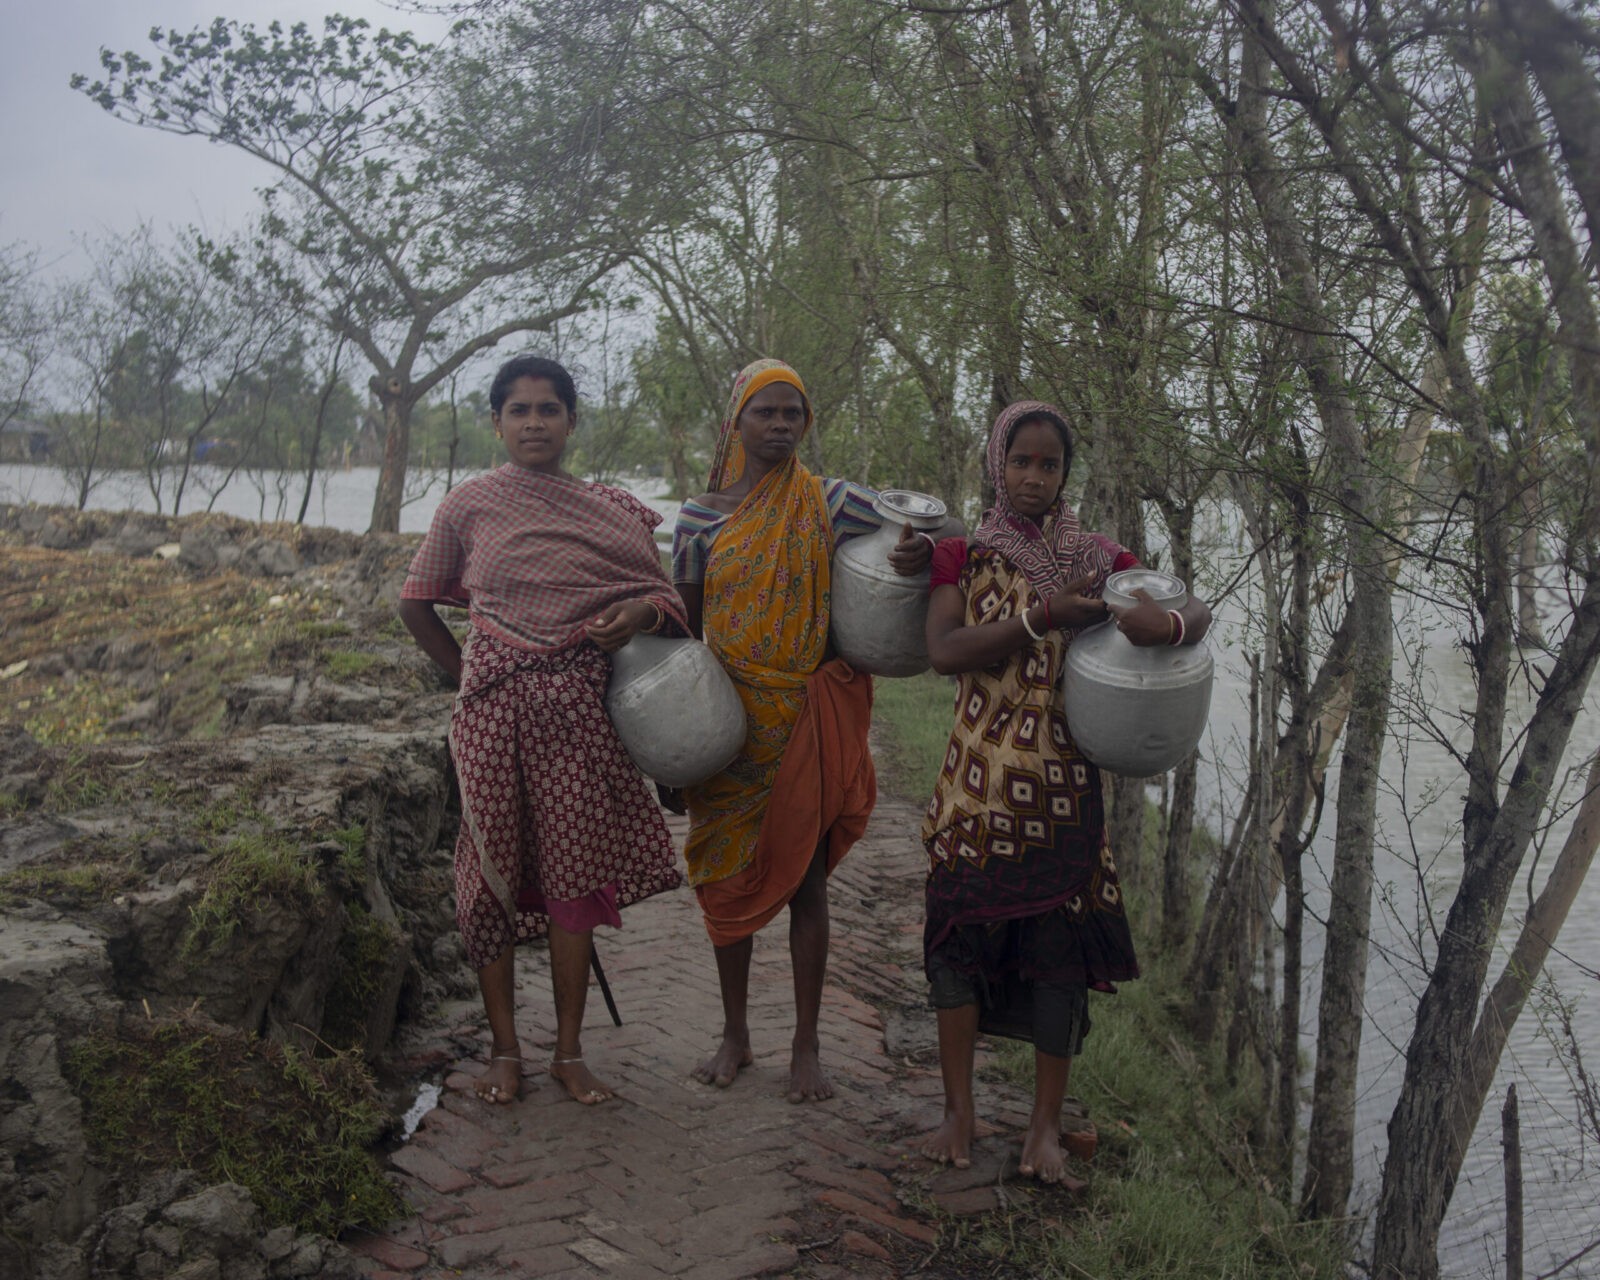 After every cyclone, the inhabitants of the Bengal delta face a major crisis of clean drinking water due to the saltwater influx. Many women travel almost two-three kilometres to fetch clean drinking water for their family, just to save them from water-borne diseases during the flood and monsoon